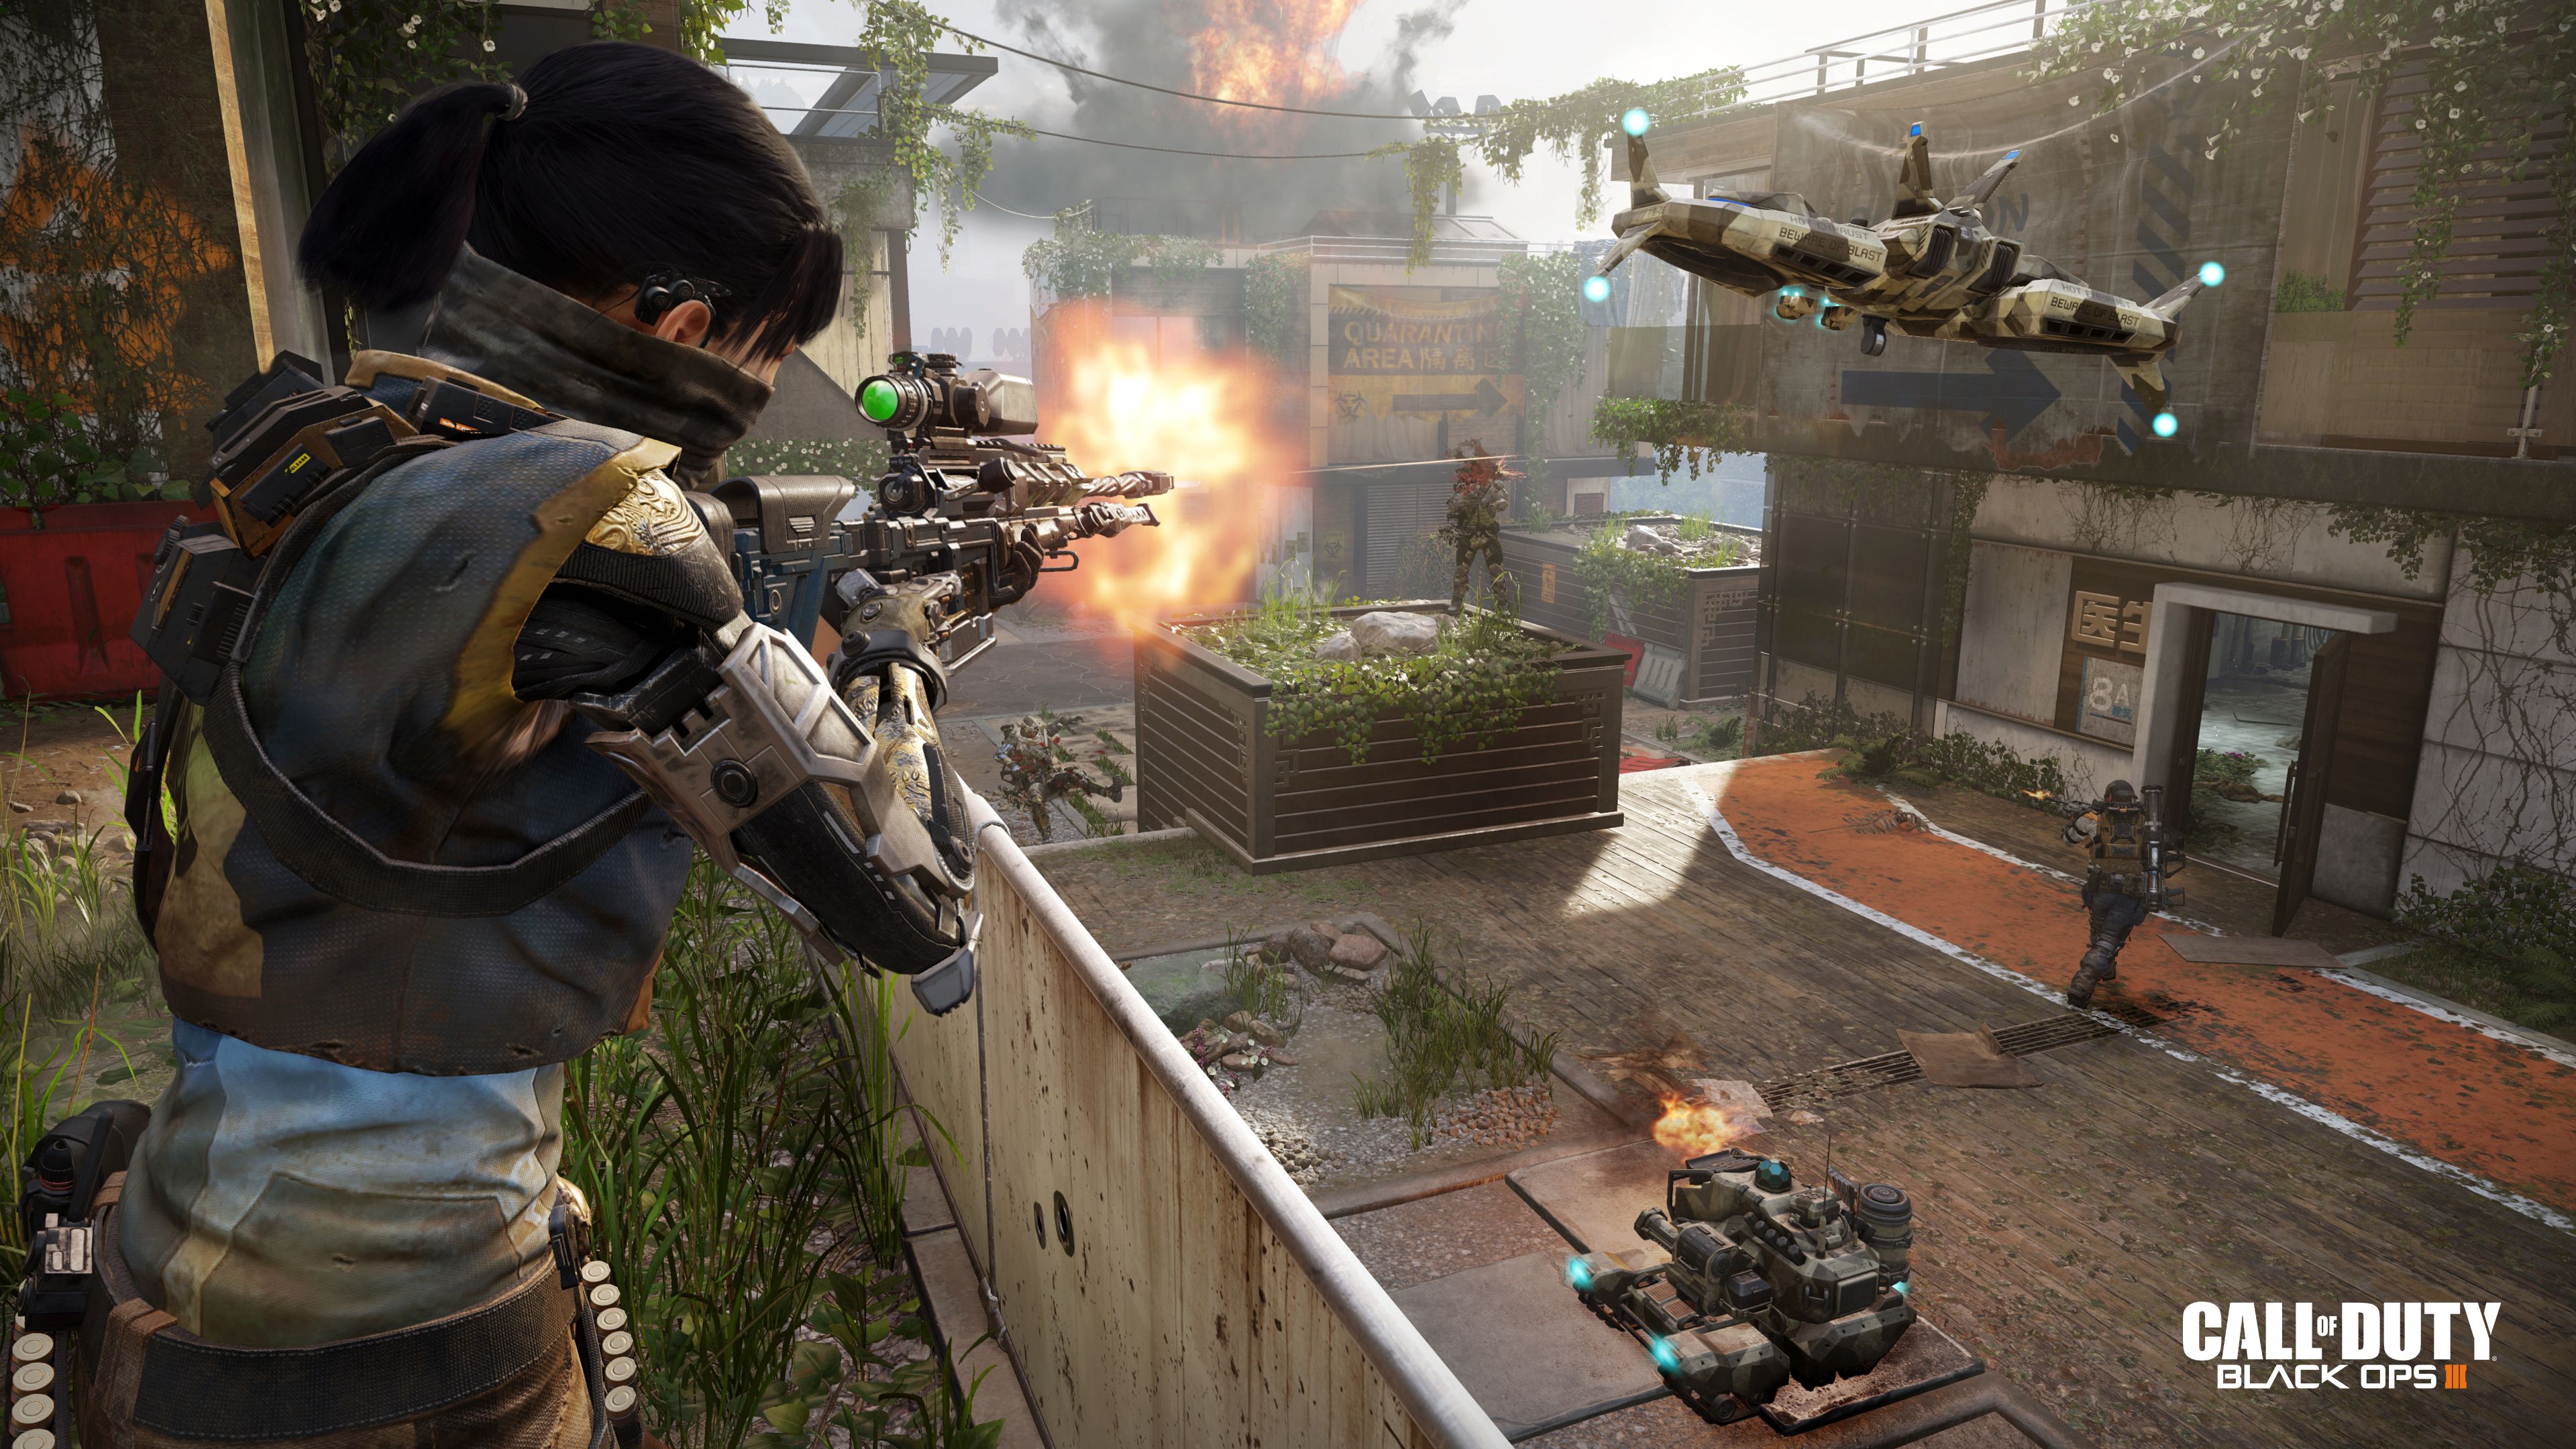 Download Call Of Duty Black Ops 3 Apk For Android